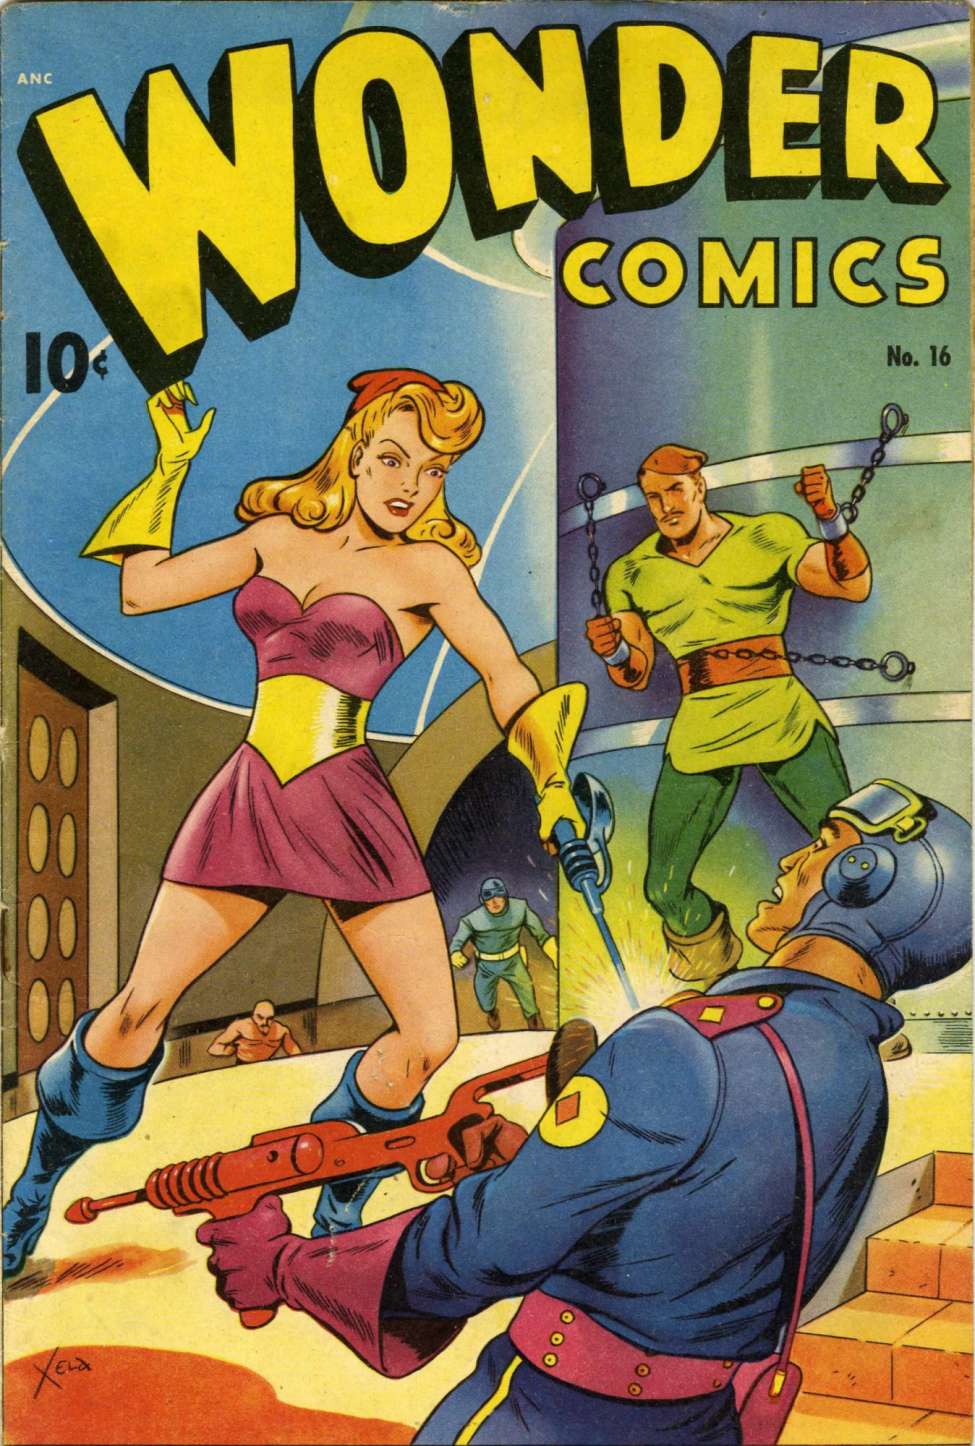 Book Cover For Wonder Comics 16